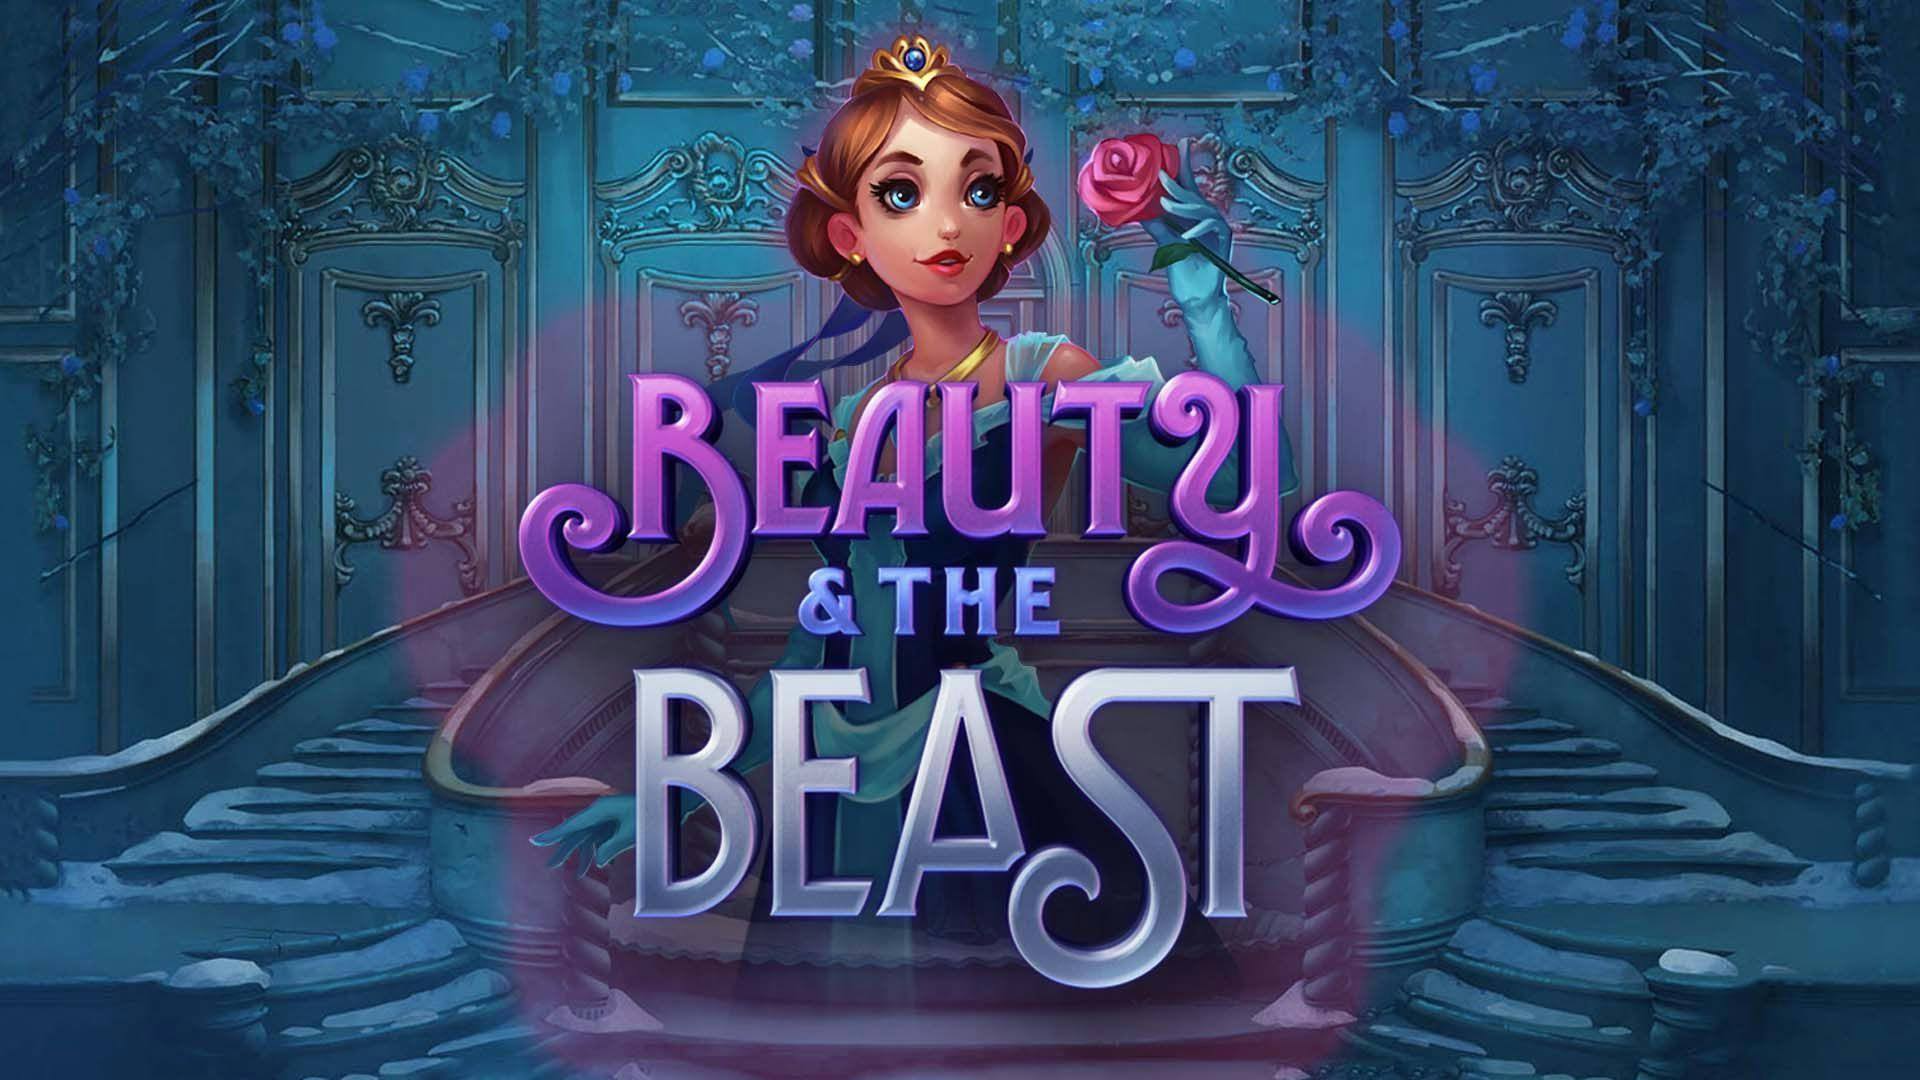 Beauty & The Beast Slot Machine Online Free Game Play